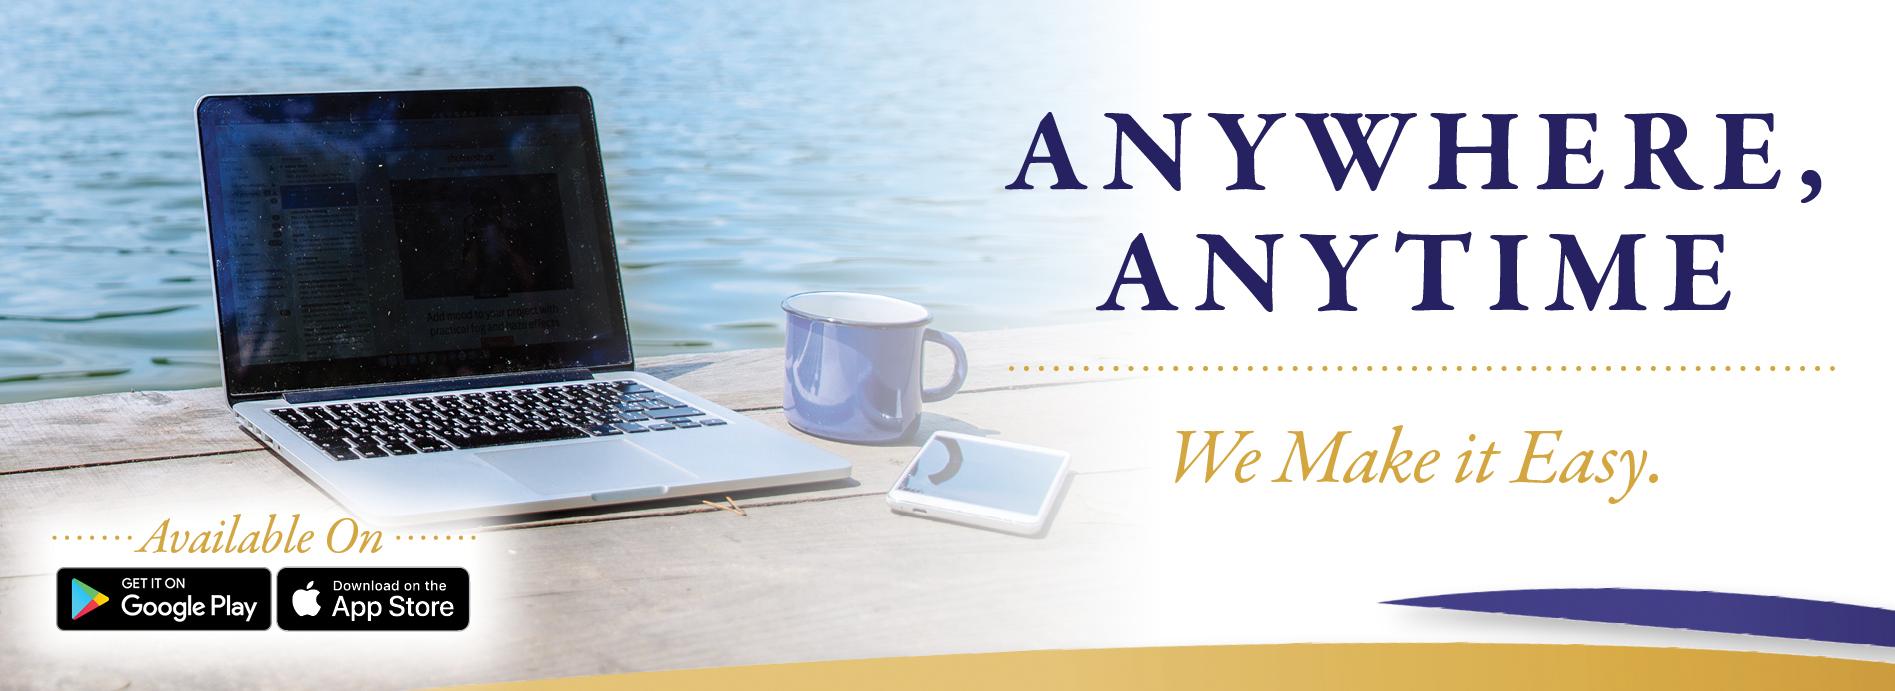 Anywhere, Anytime.  We Make it Easy.  Image of a laptop, cell phone and cup of coffee with water in the background.